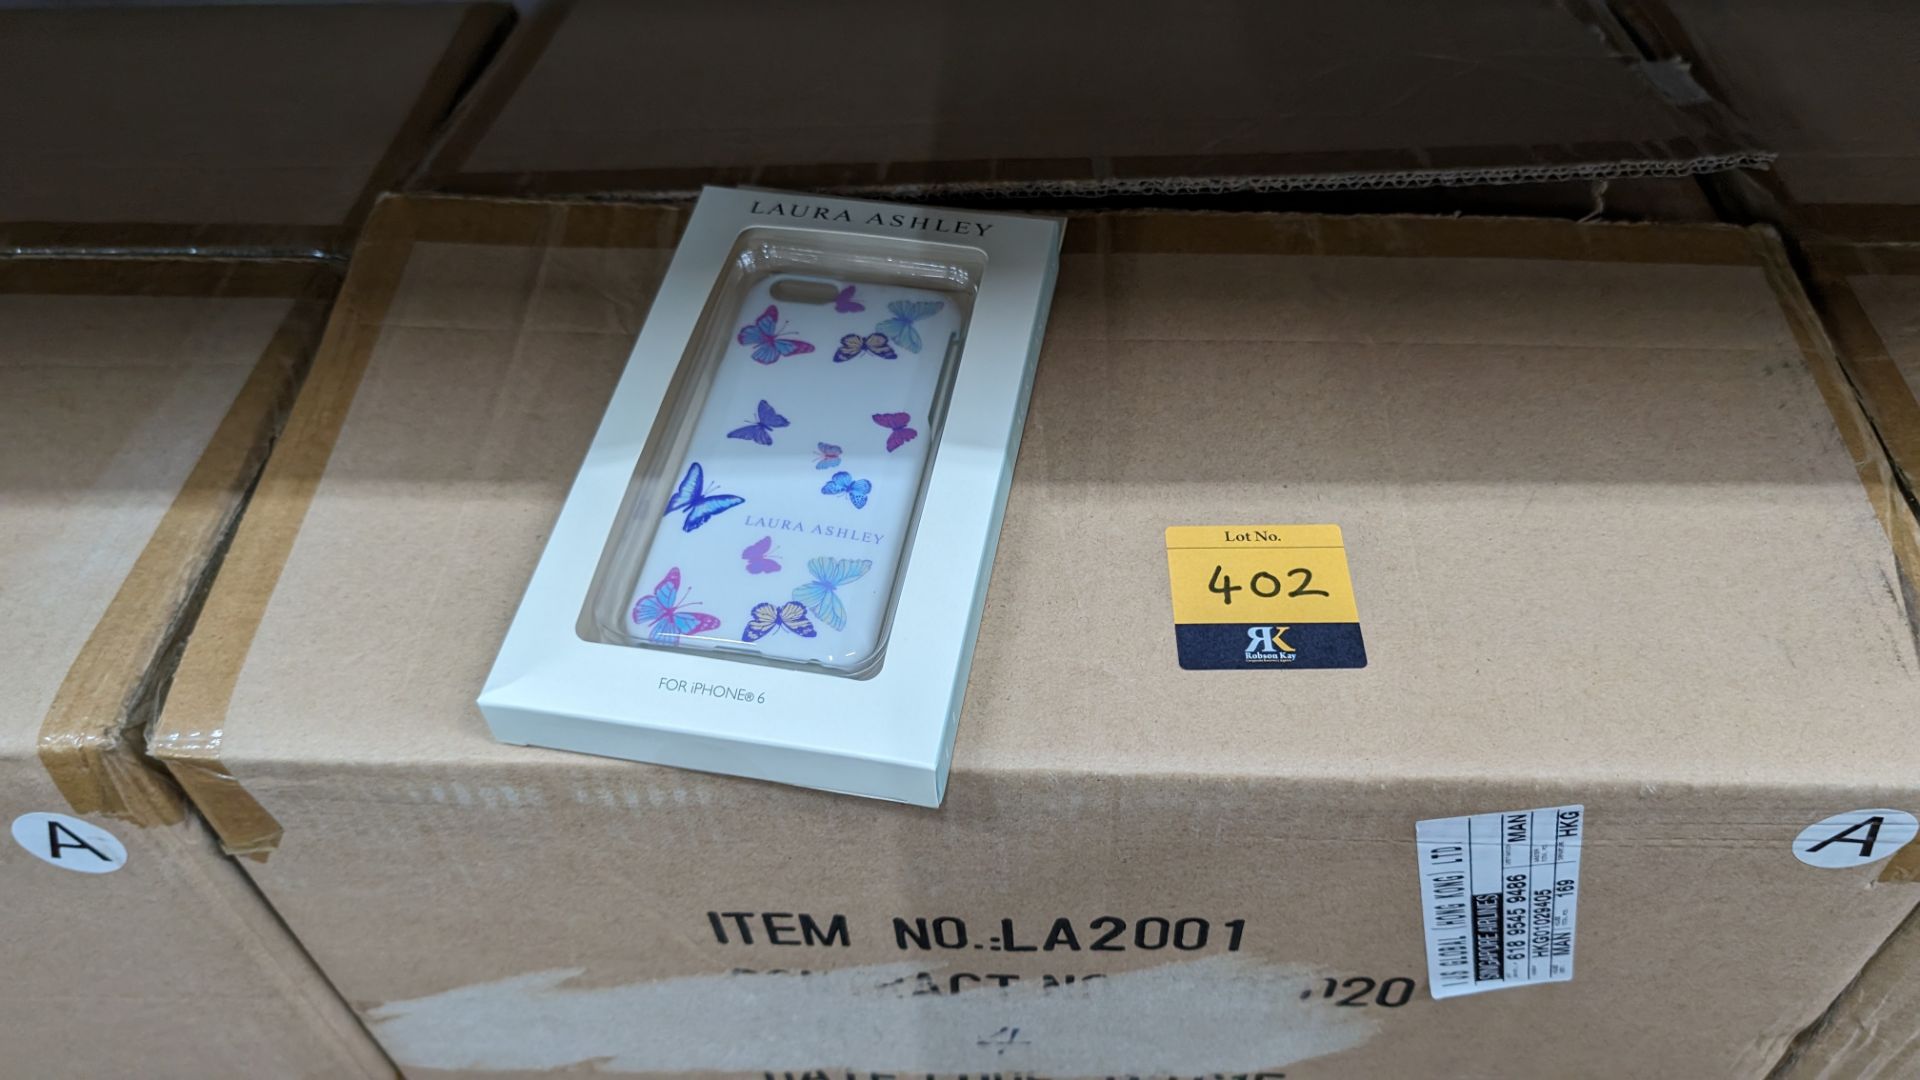 160 off Laura Ashley iPhone 6 covers, design LA2001 (2 cartons) - Image 4 of 5